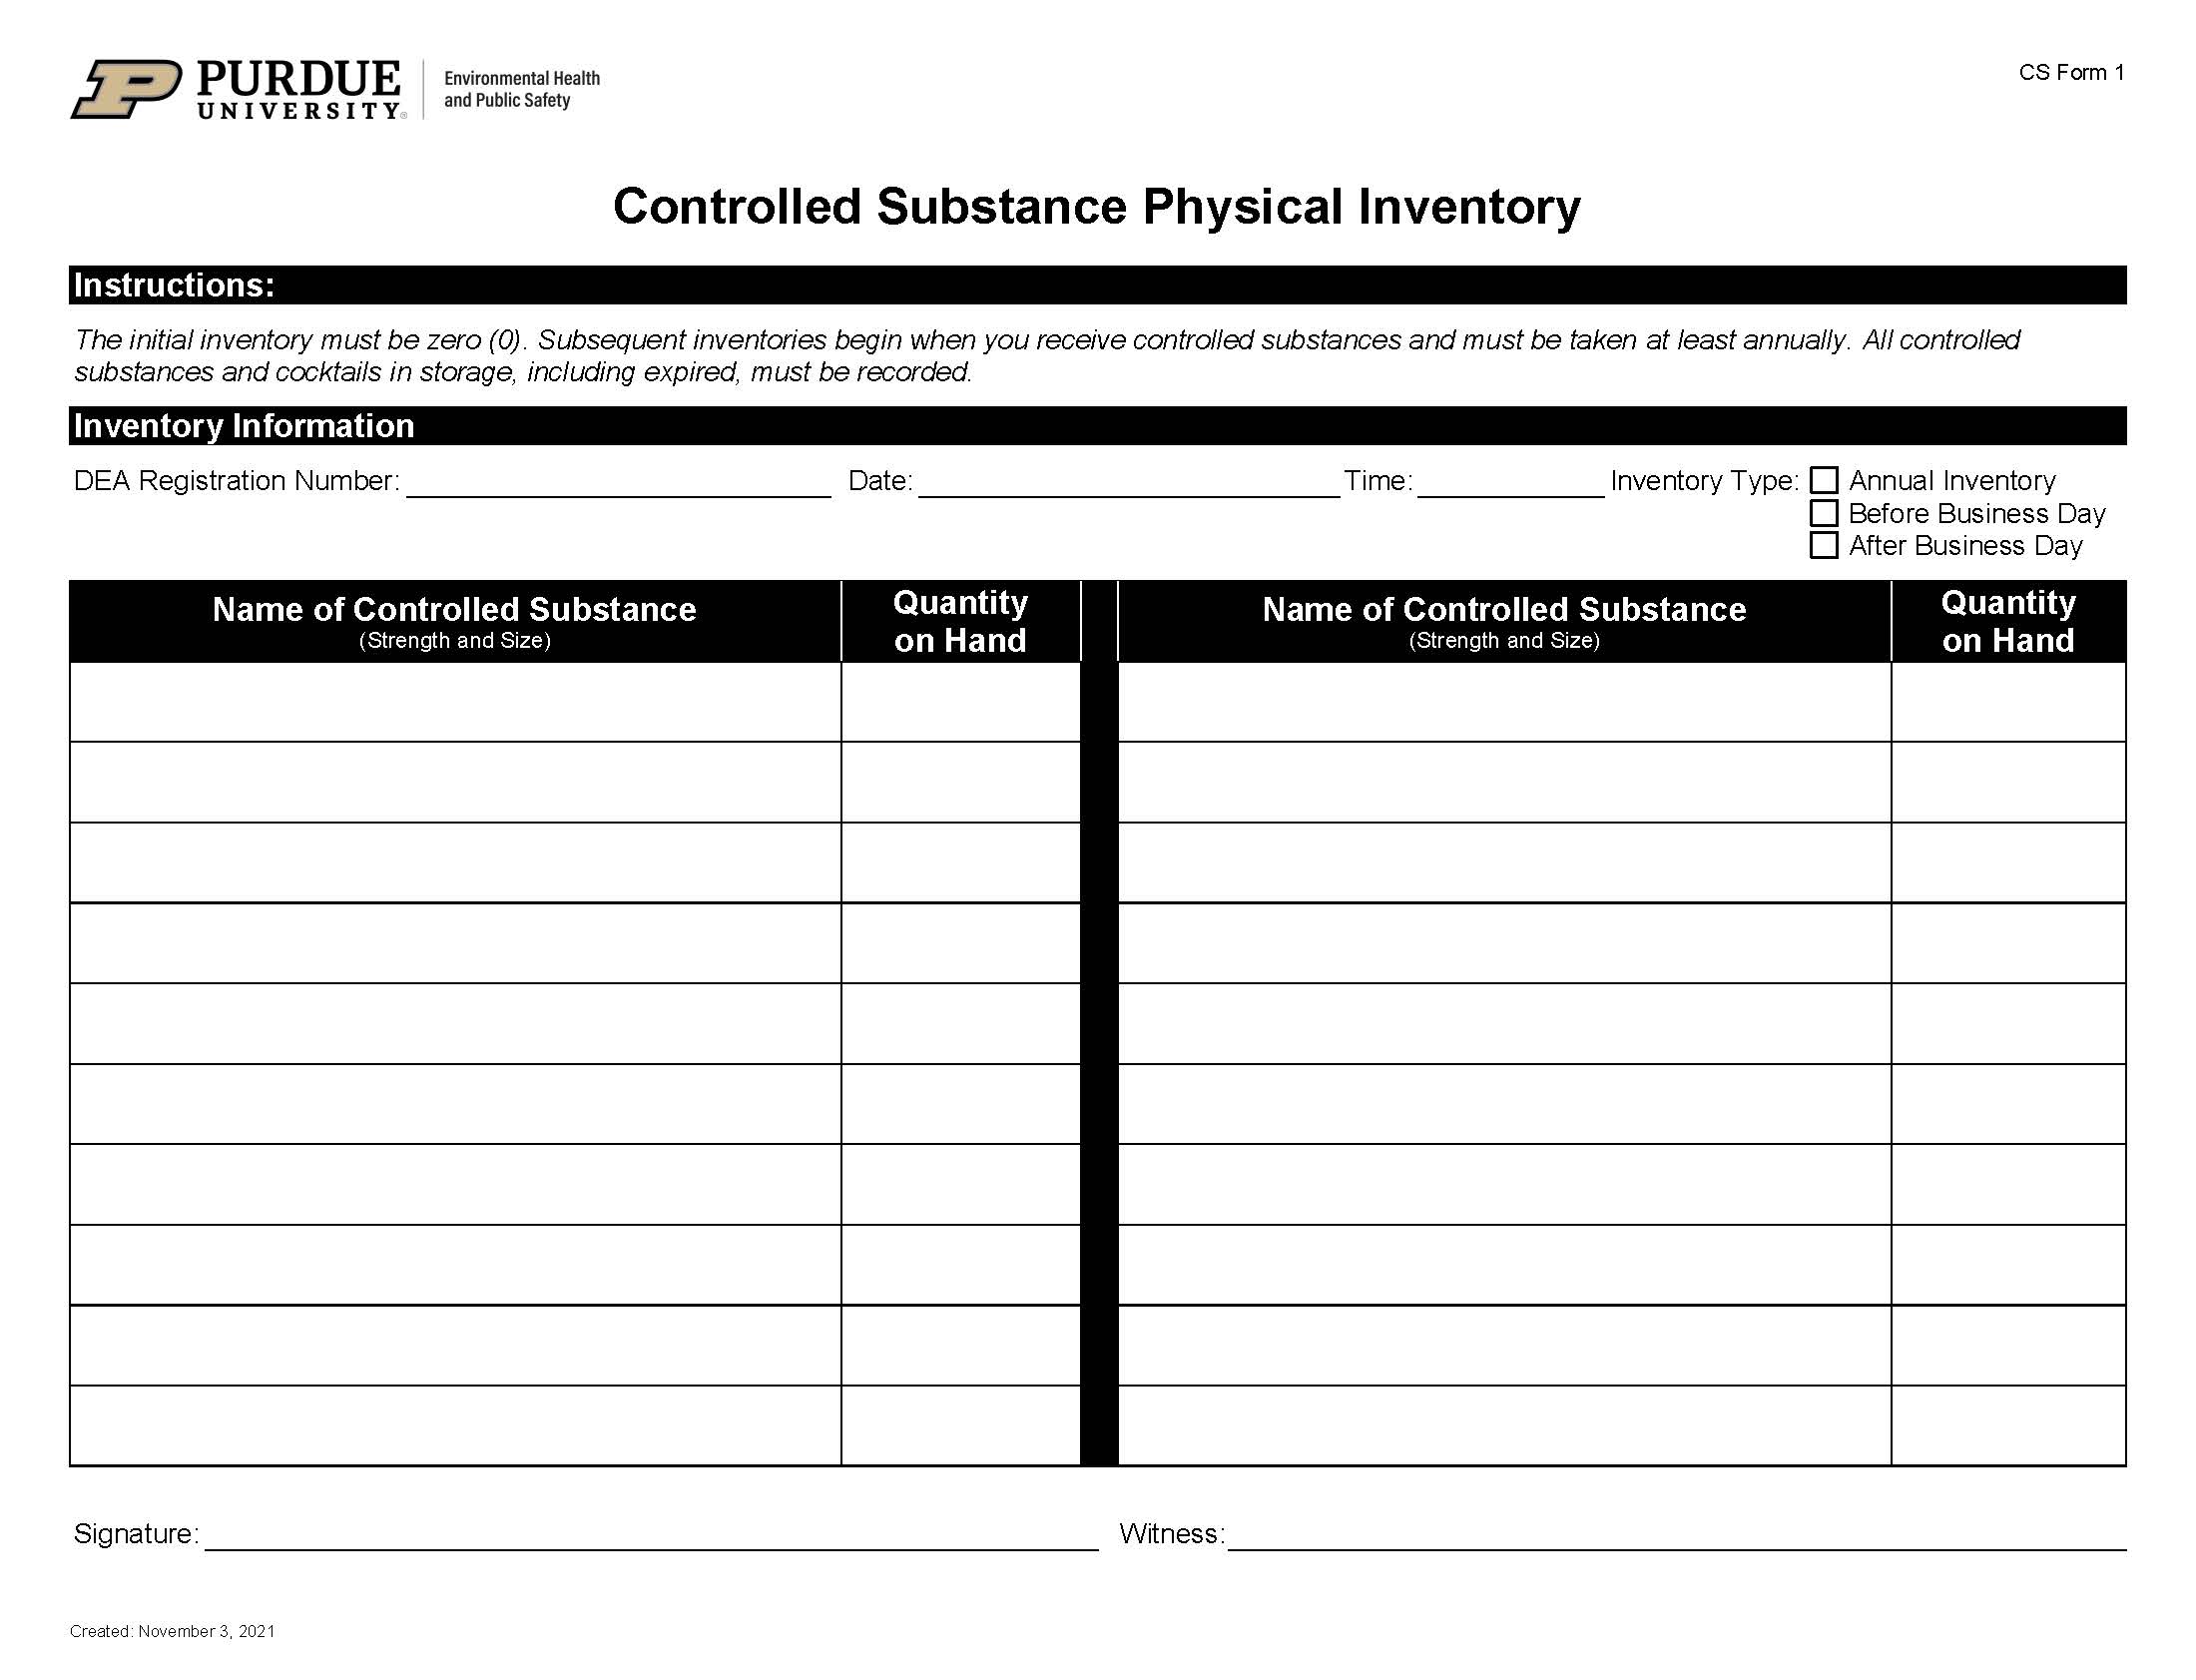 clickable link to controlled substance physical inventory form